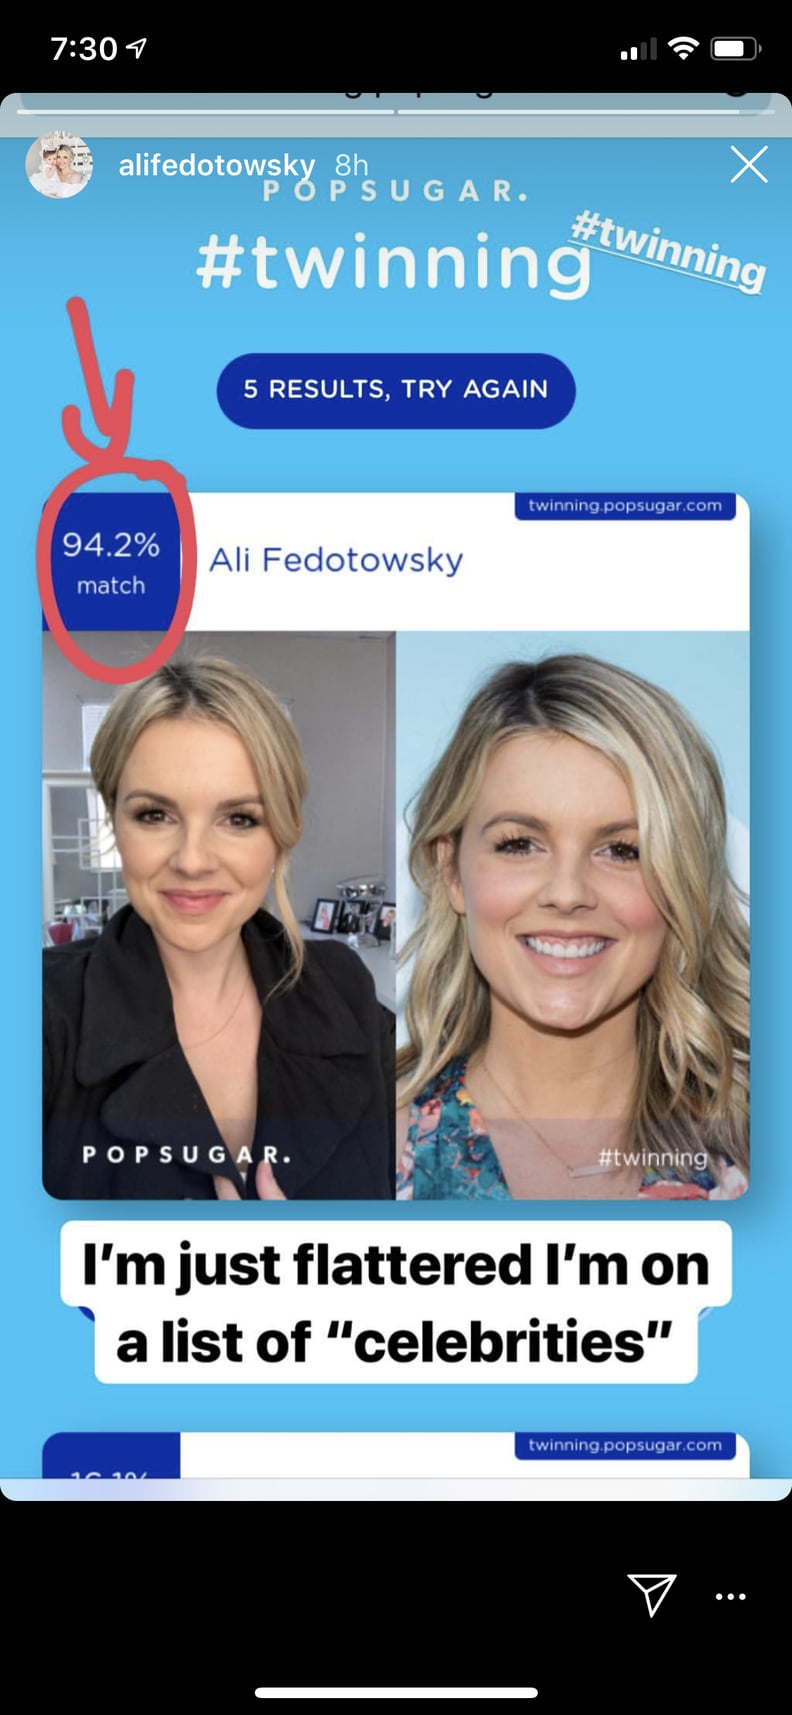 Ali Fedotowsky was flattered to match with herself.